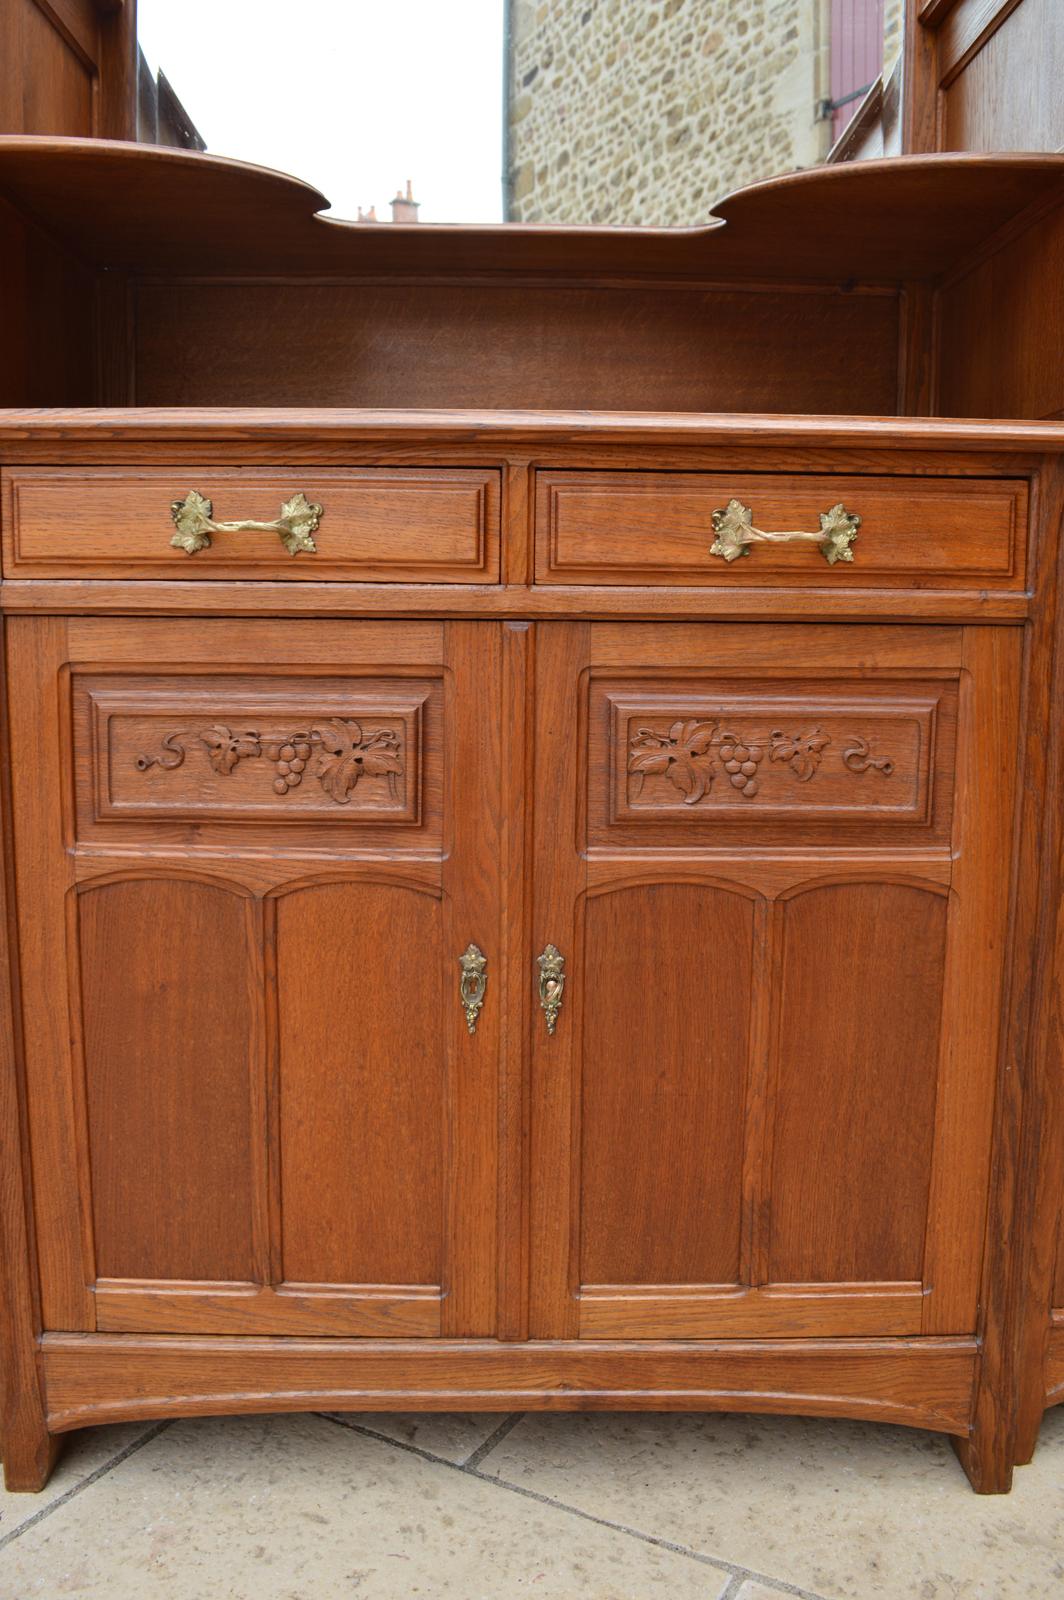 Early 20th Century Art Nouveau Oak Carved Dining Room Set by Gauthier Poinsignon, circa 1910 For Sale